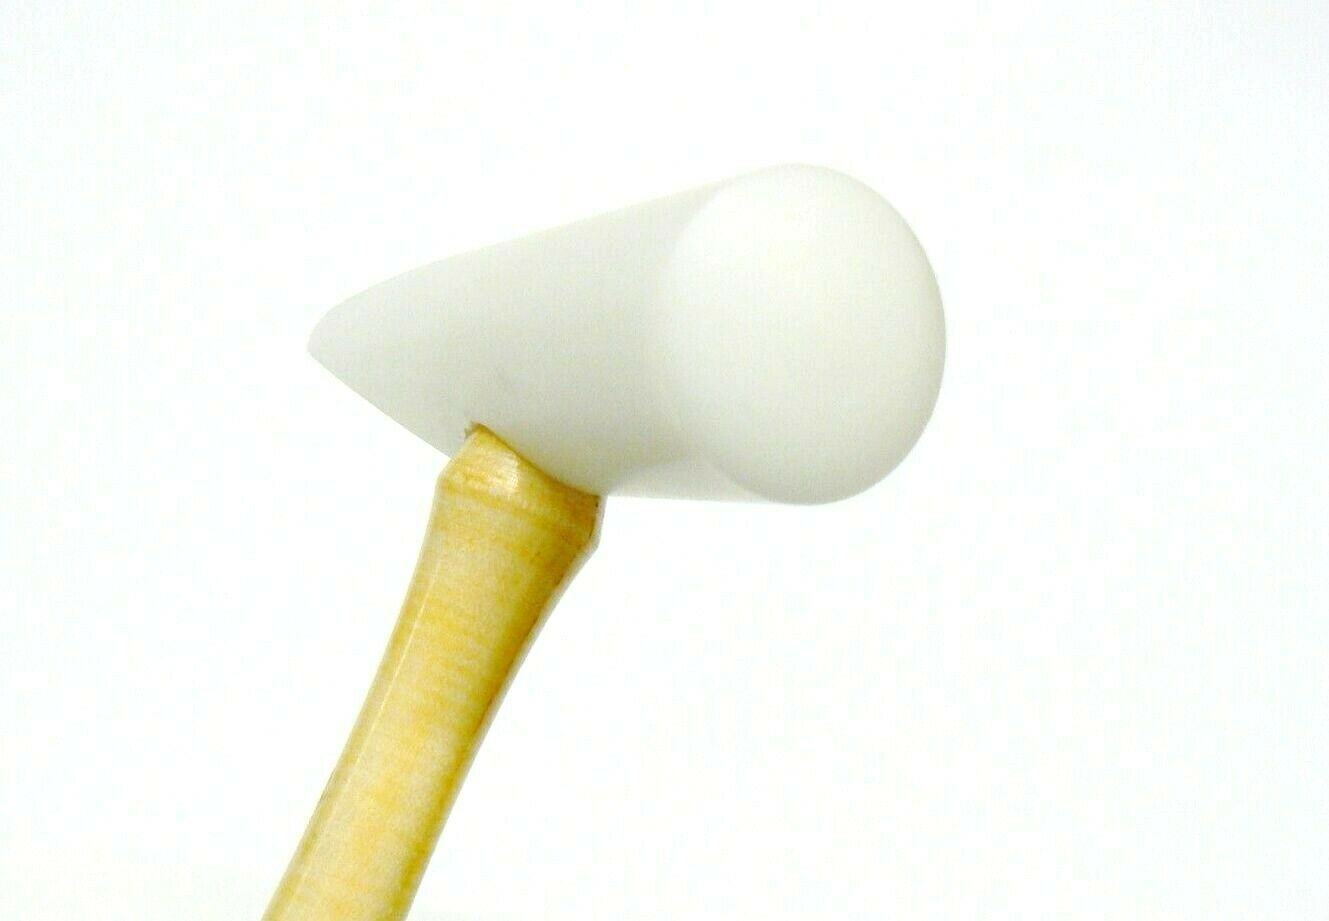 Nylon Hammer Plastic Mallet 4-3/4" Long Dome & Wedge Head Jewelry Metal Forming